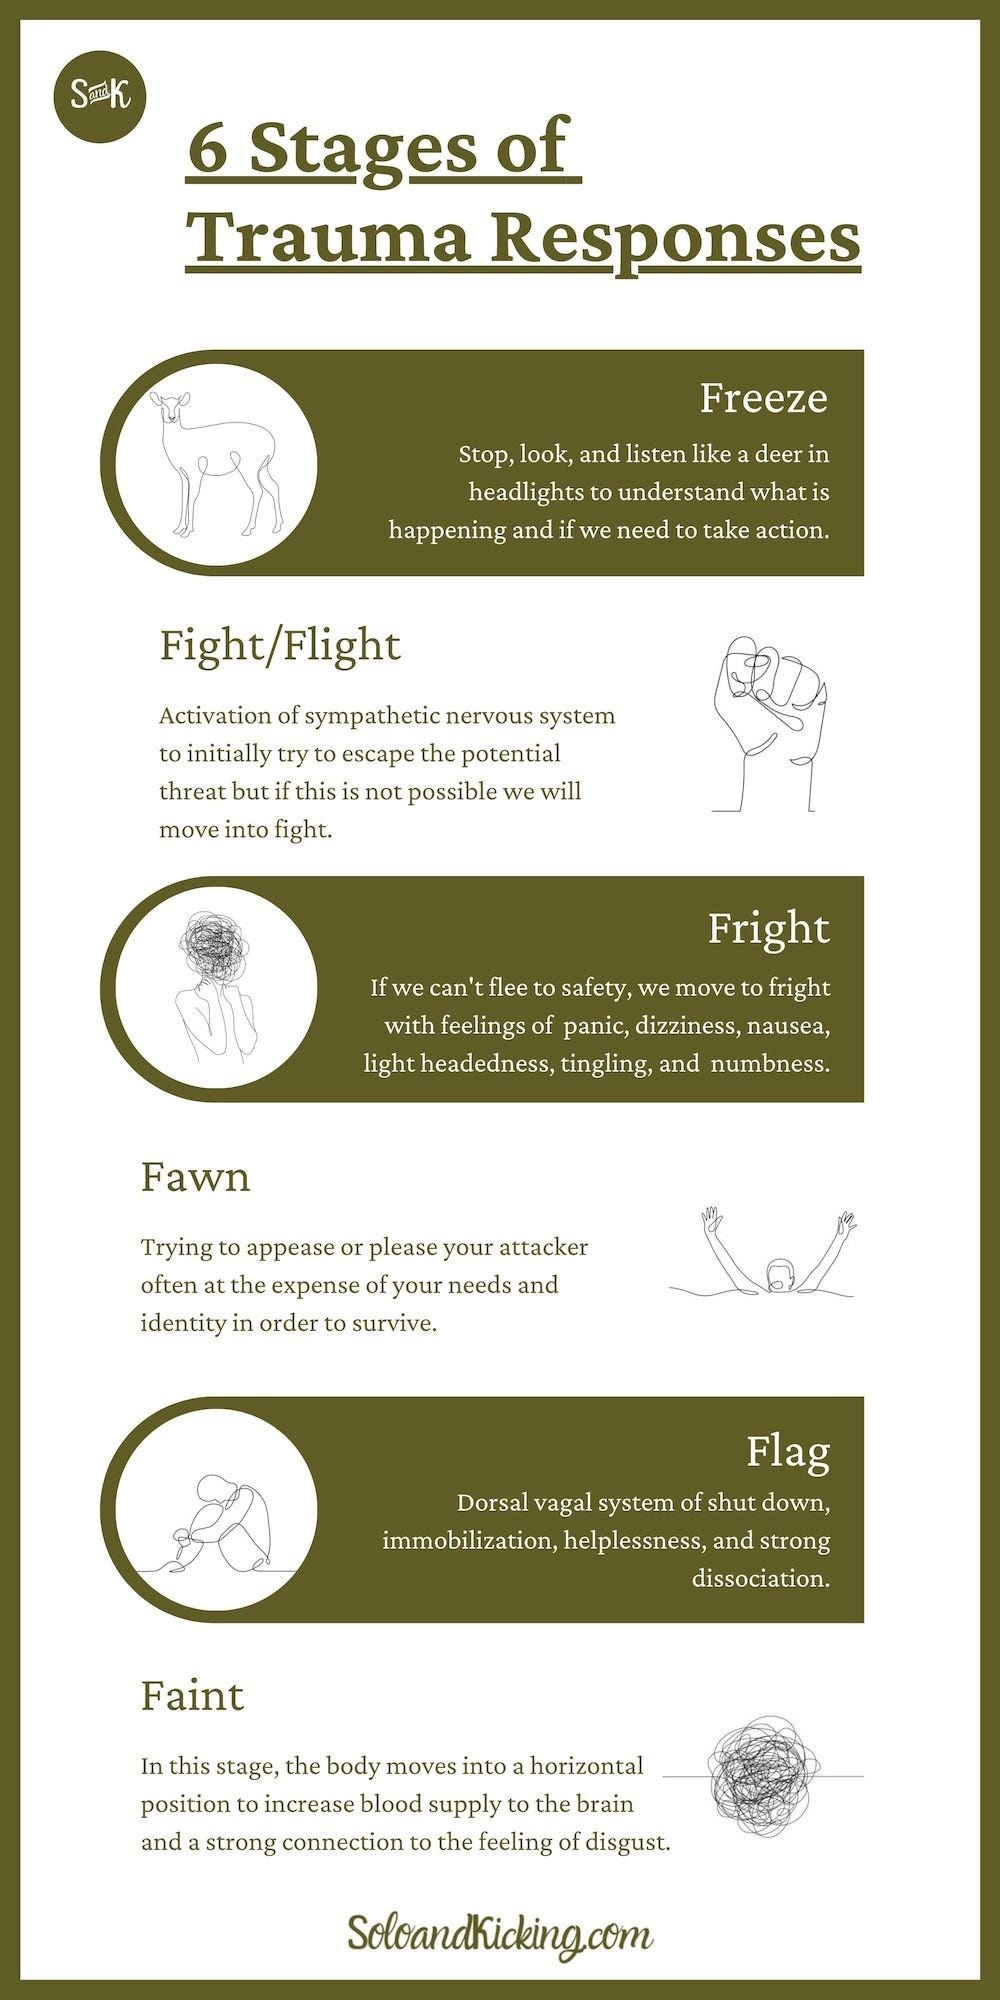 6 Stages of Trauma Response: Freeze, Fight/Flight, Fawn, Fright, Flag, and Faint